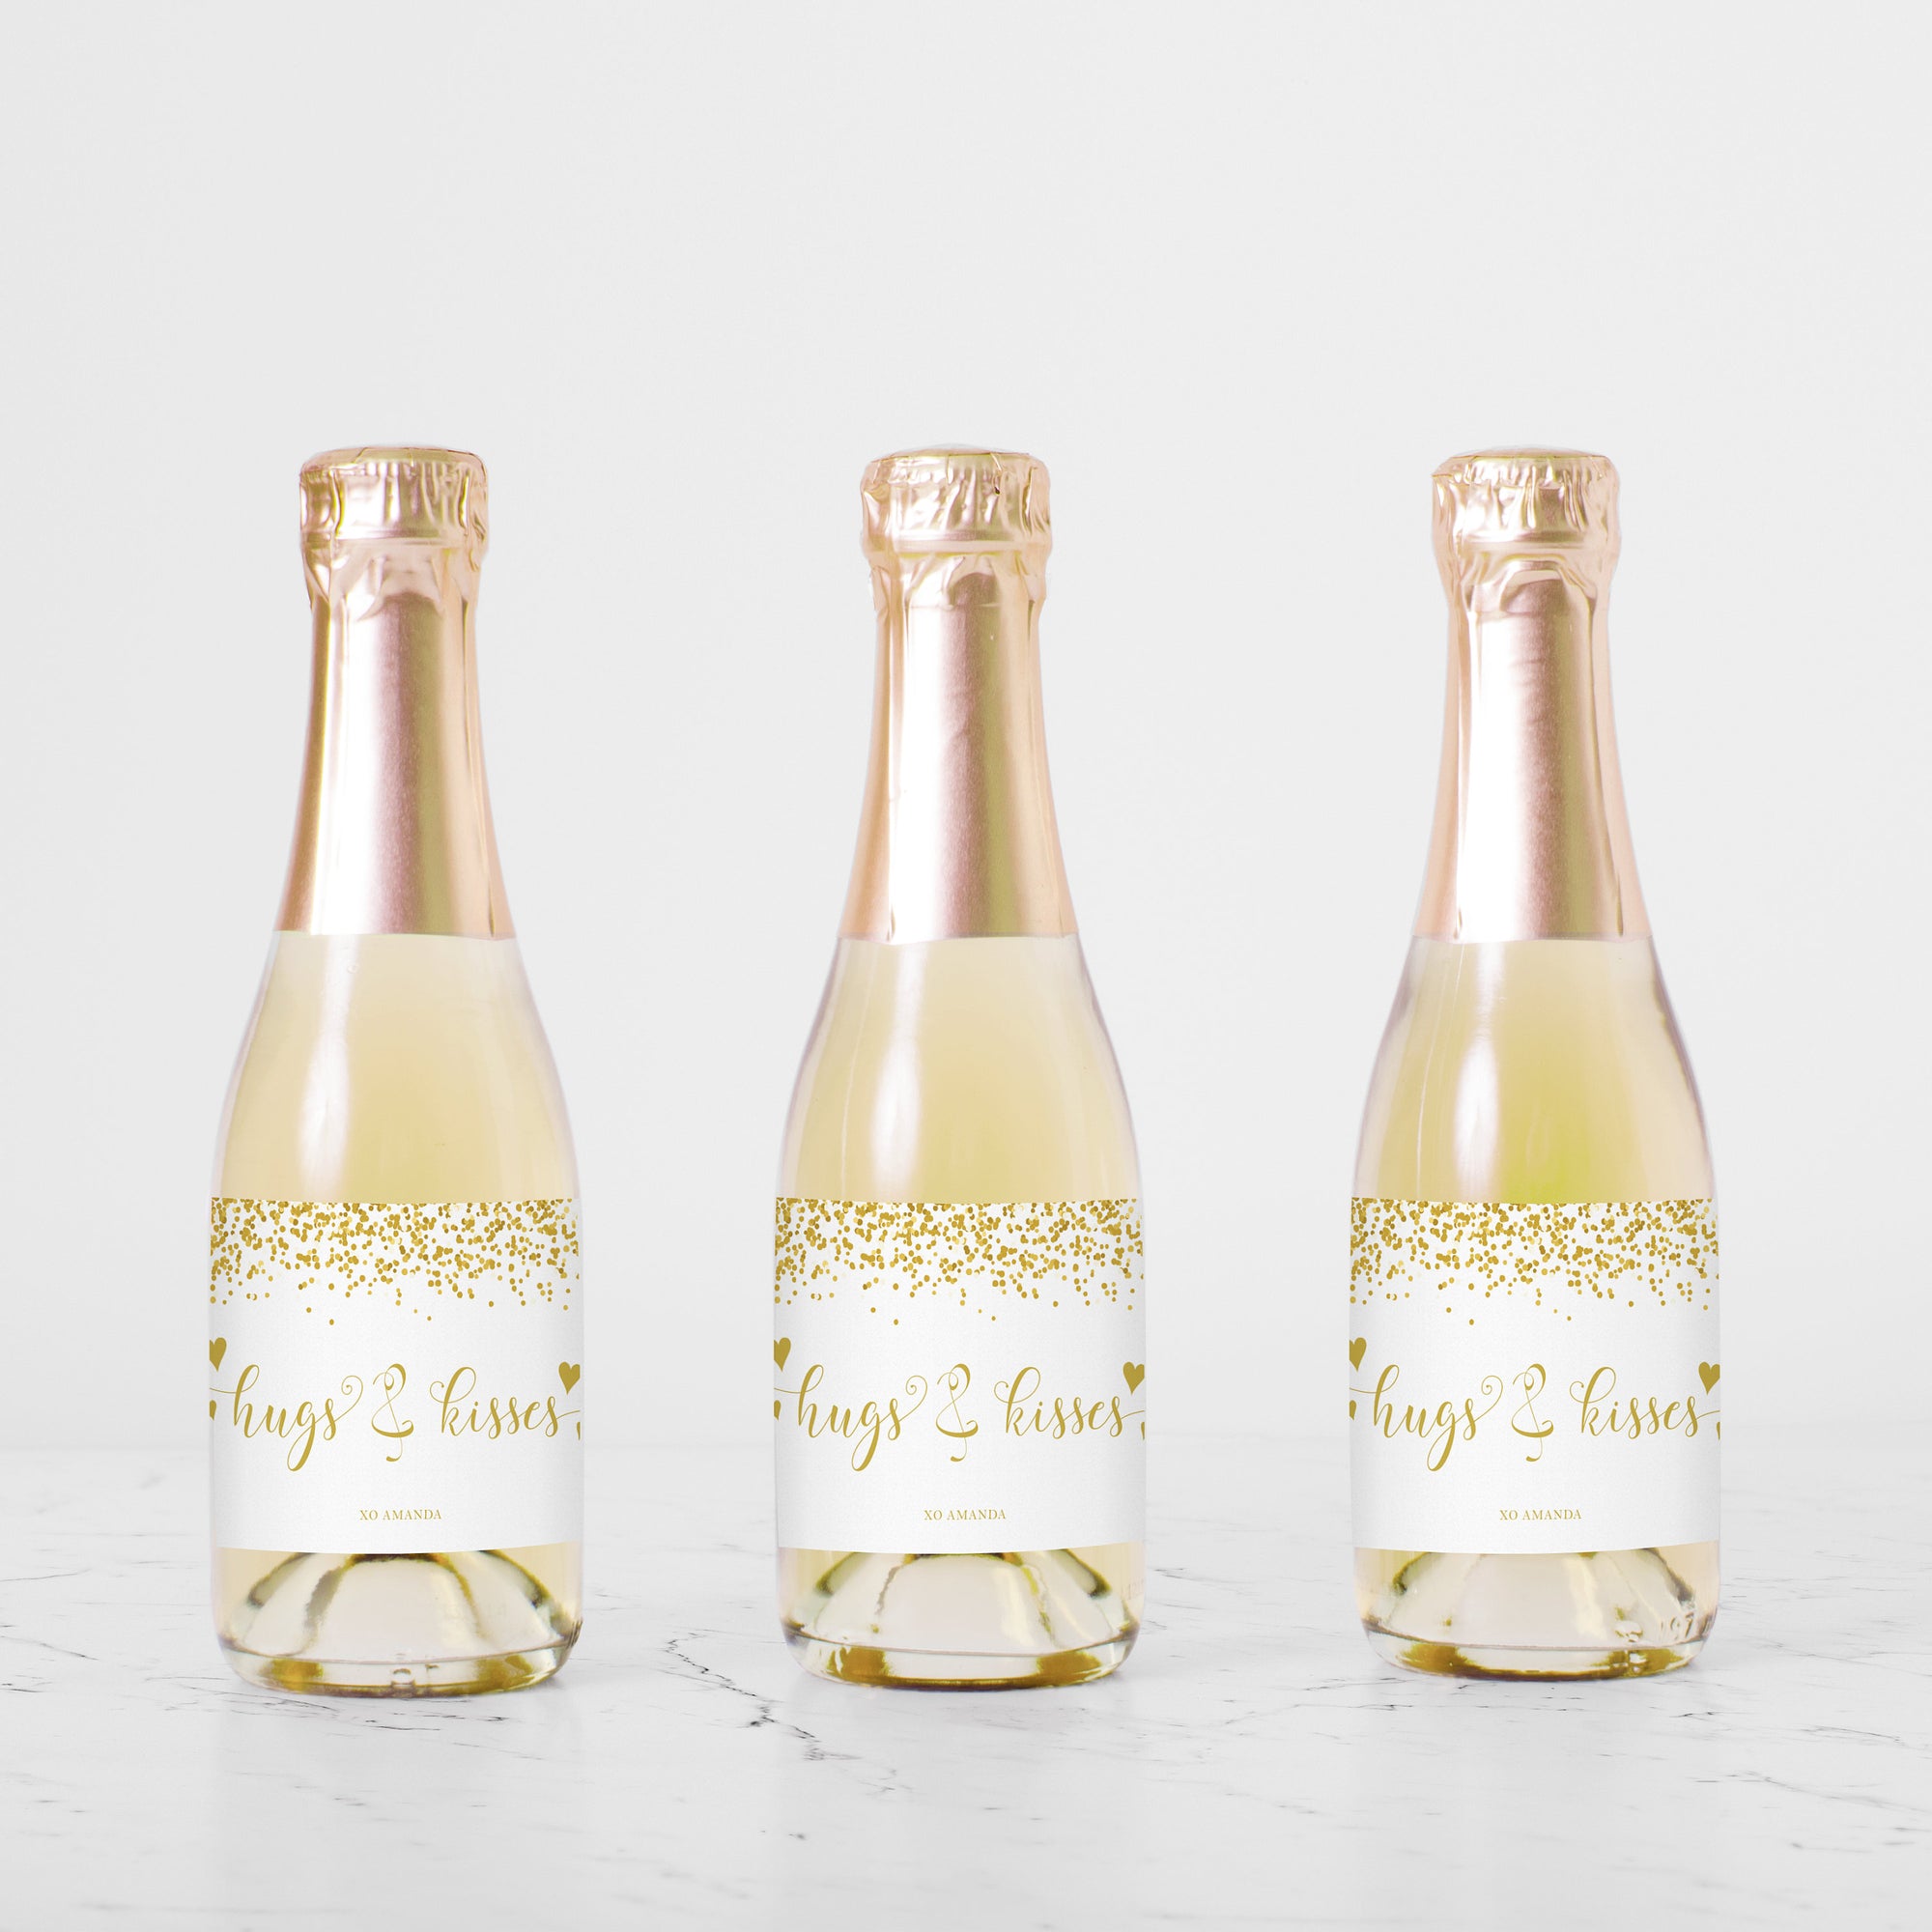 Free Printable Champagne Bottle Label Template - Printable Templates Free